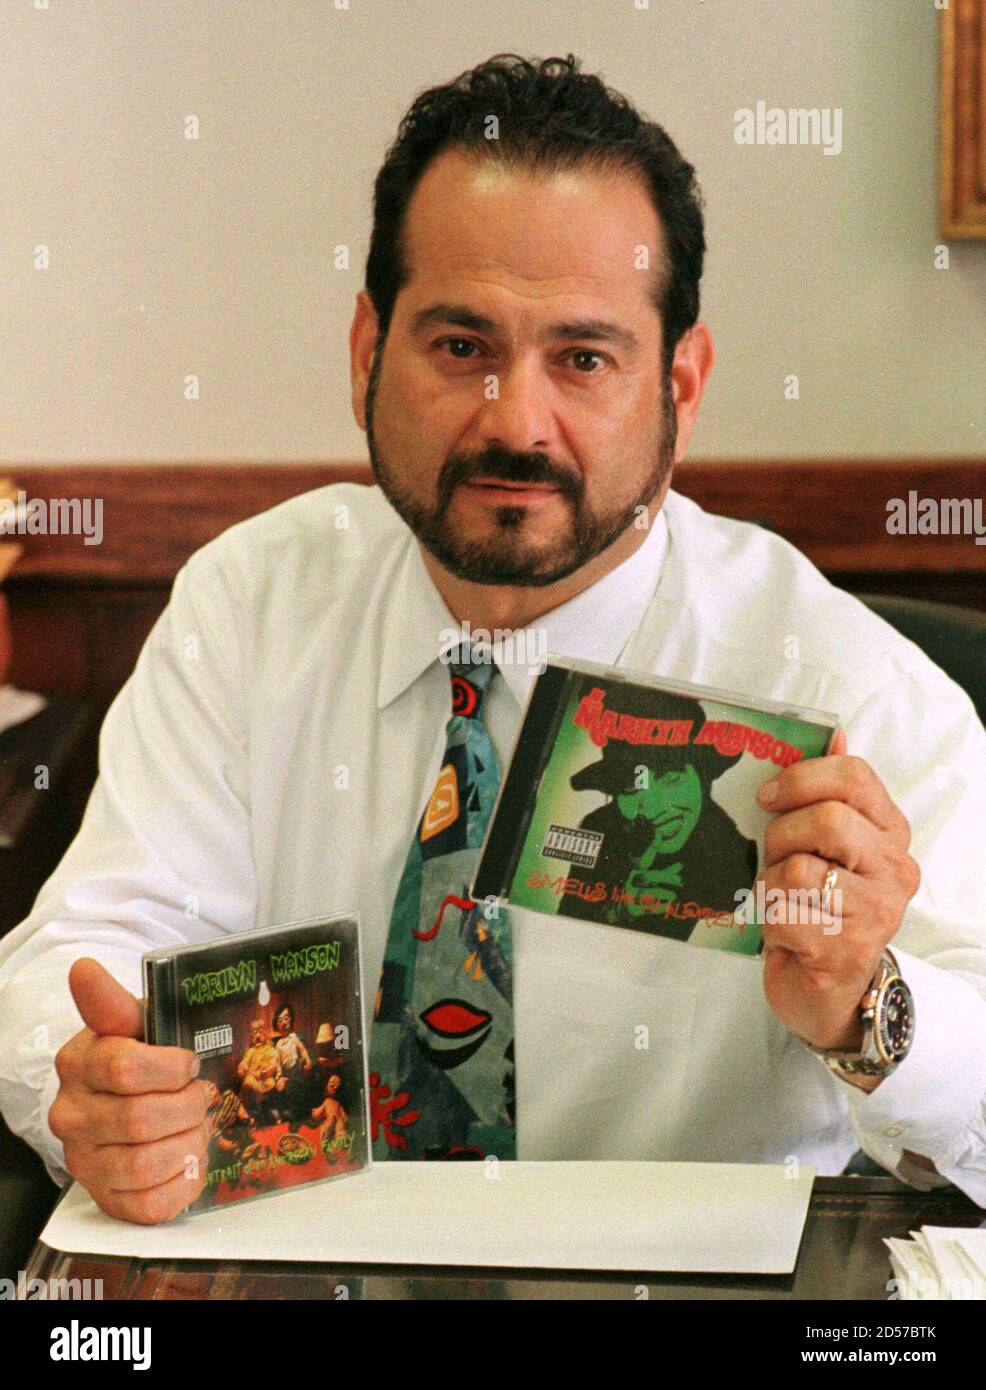 Attorney Paul J. Cambria Jr., spokesman and counsel for shock-rock musician 'Marilyn Manson' holds two recent CD's April 21 in Buffalo, NY, as he disclaims any connection between the singer and the high school shootings in Littleton, CO. The shooting suspects reportedly talked about the music of 'Marilyn Manson', a stage name for singer Brian Warner derived from Marilyn Monroe and  Charles Manson. Stock Photo